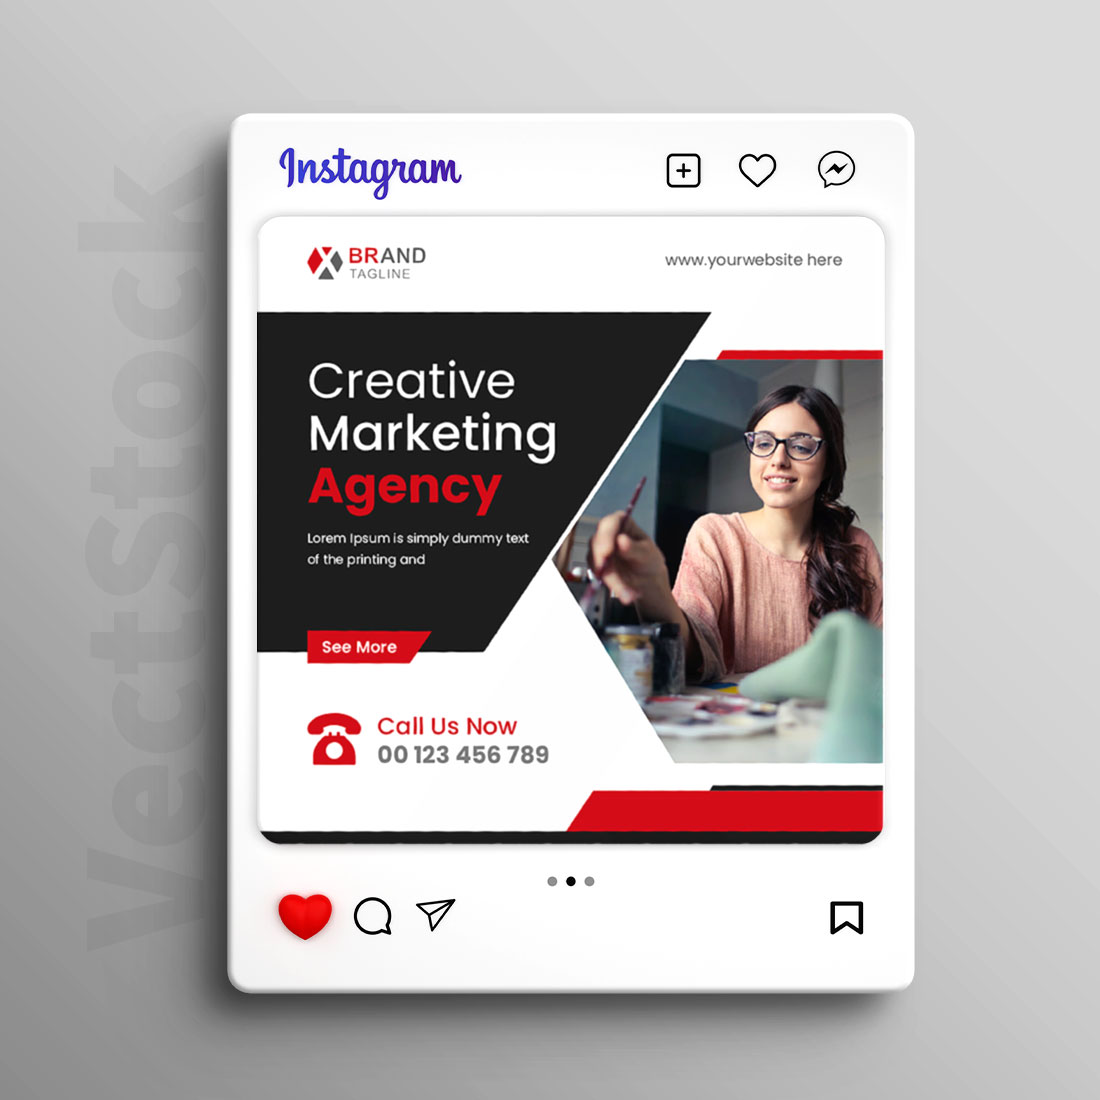 Digital marketing agency and corporate social media post template cover image.